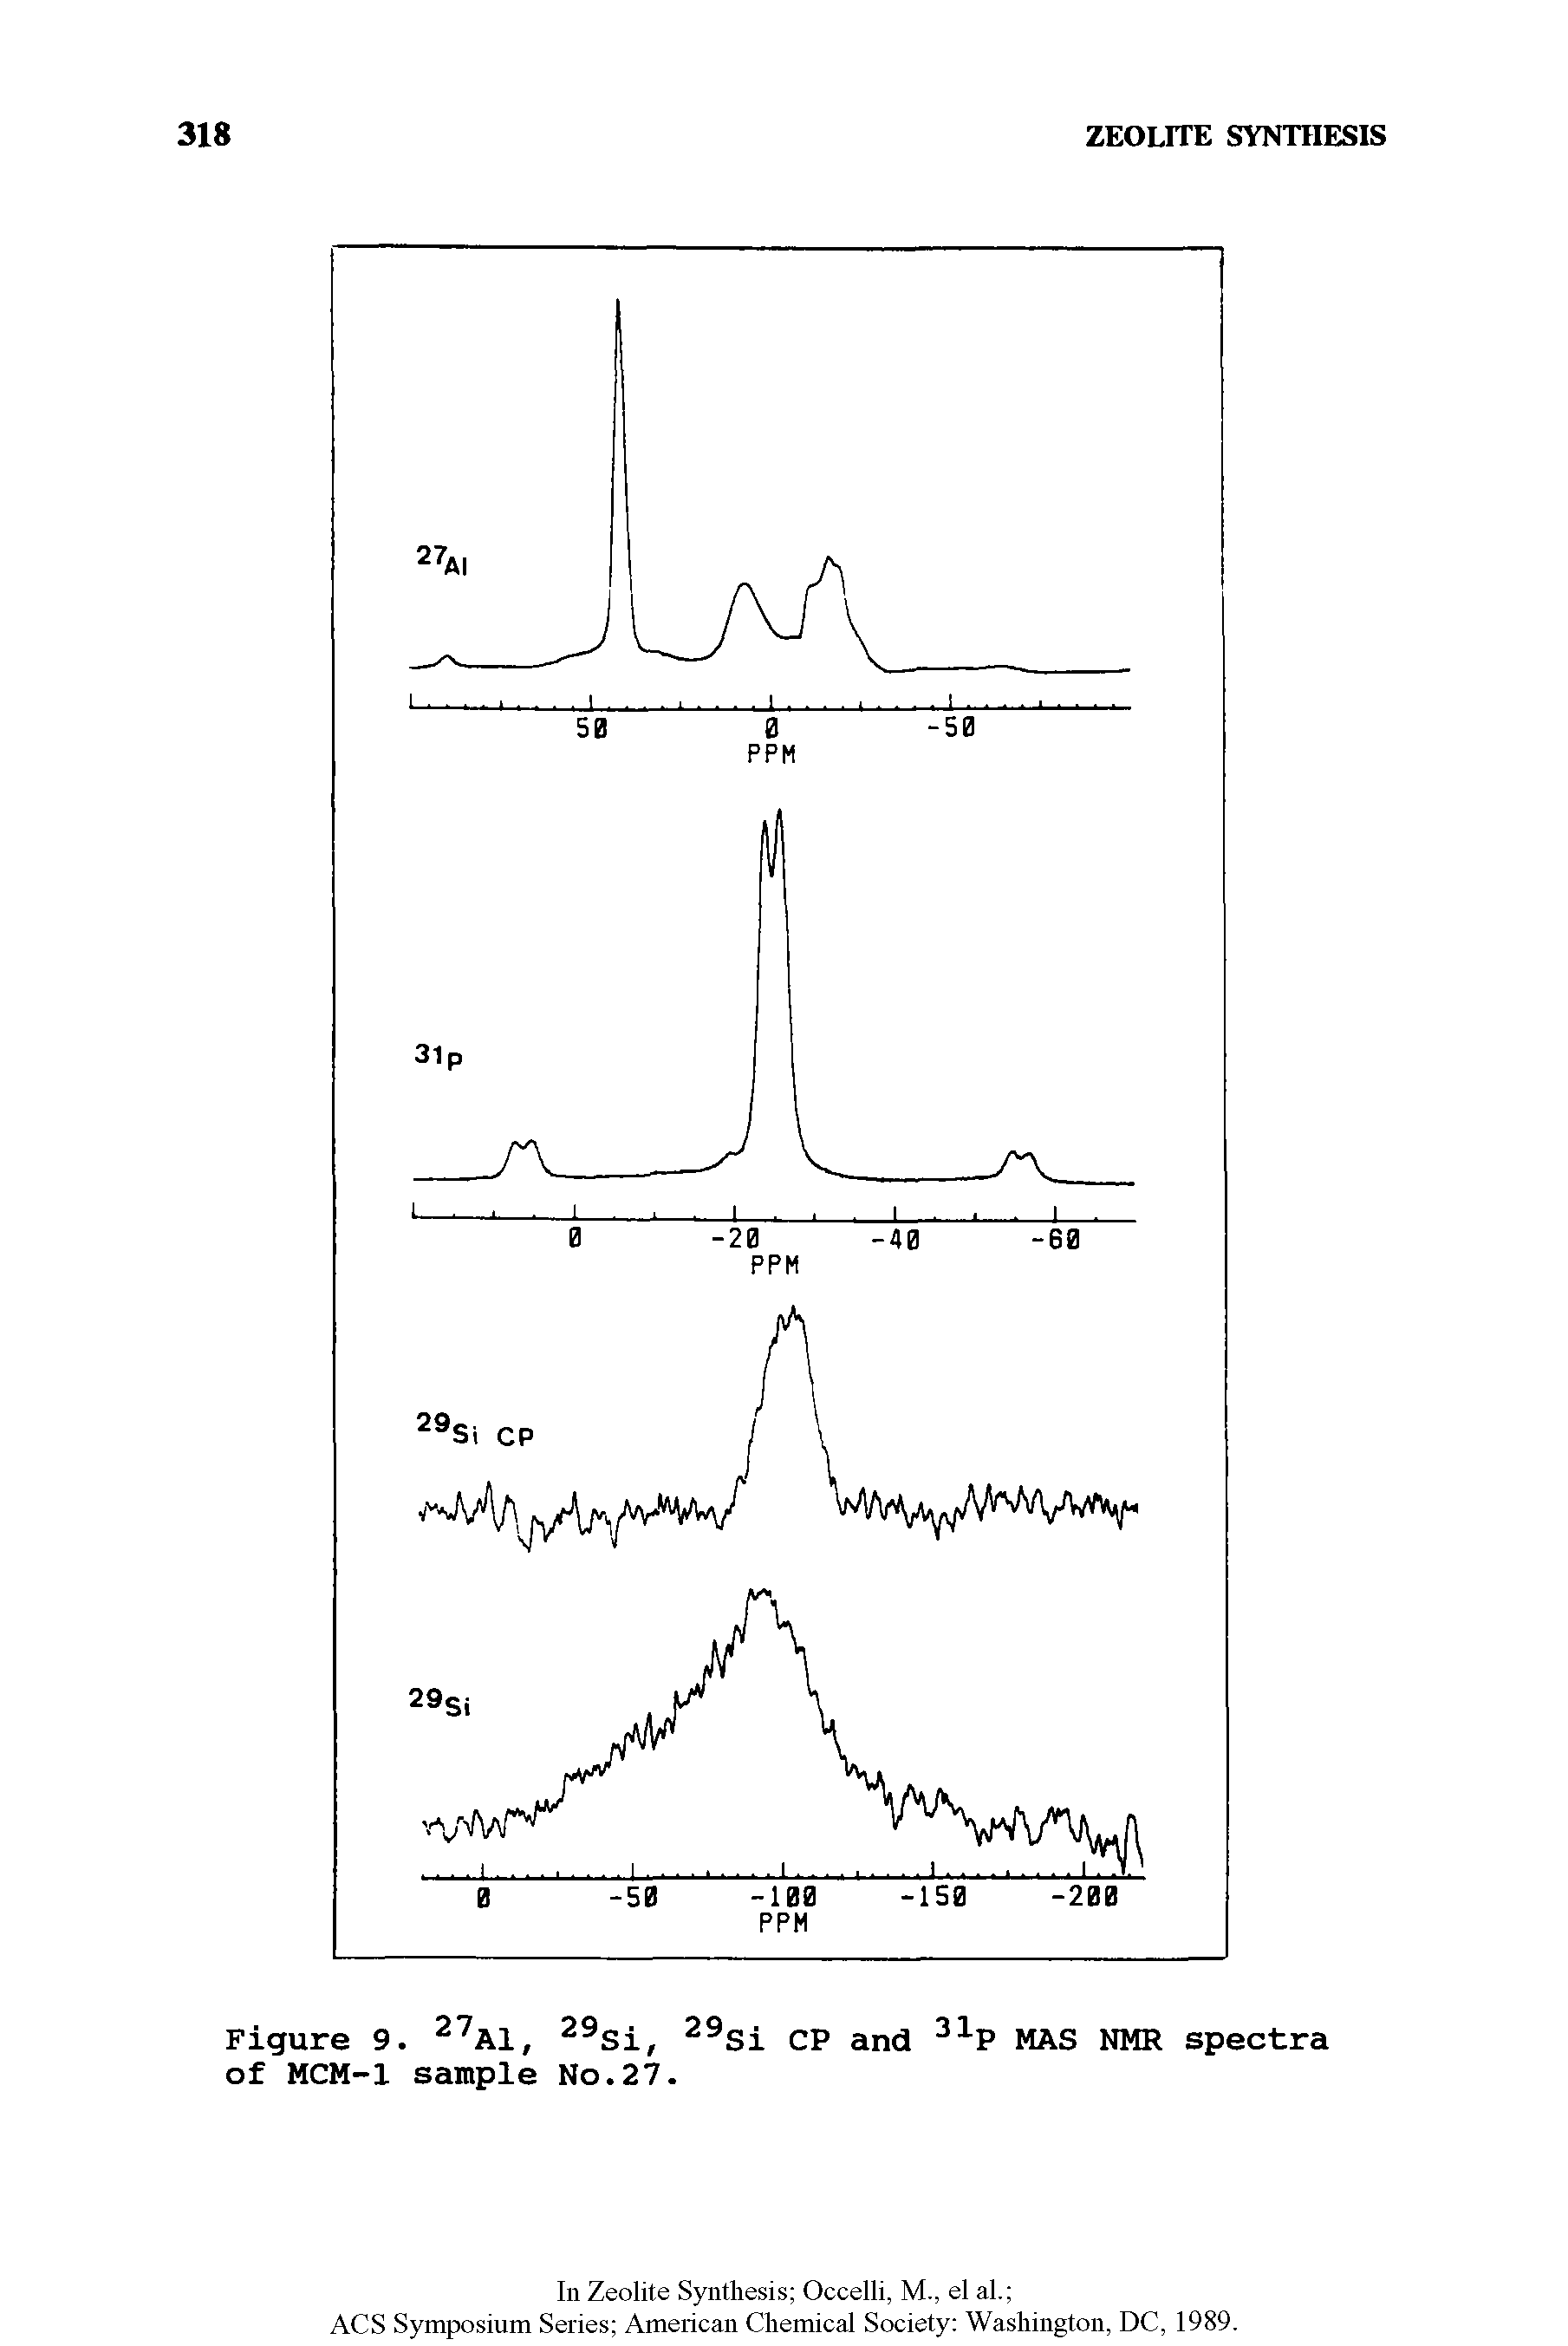 Figure 9. 27A1, 29si, 29Si CP and 31P MAS NMR spectra of MCM-1 sample No.27.